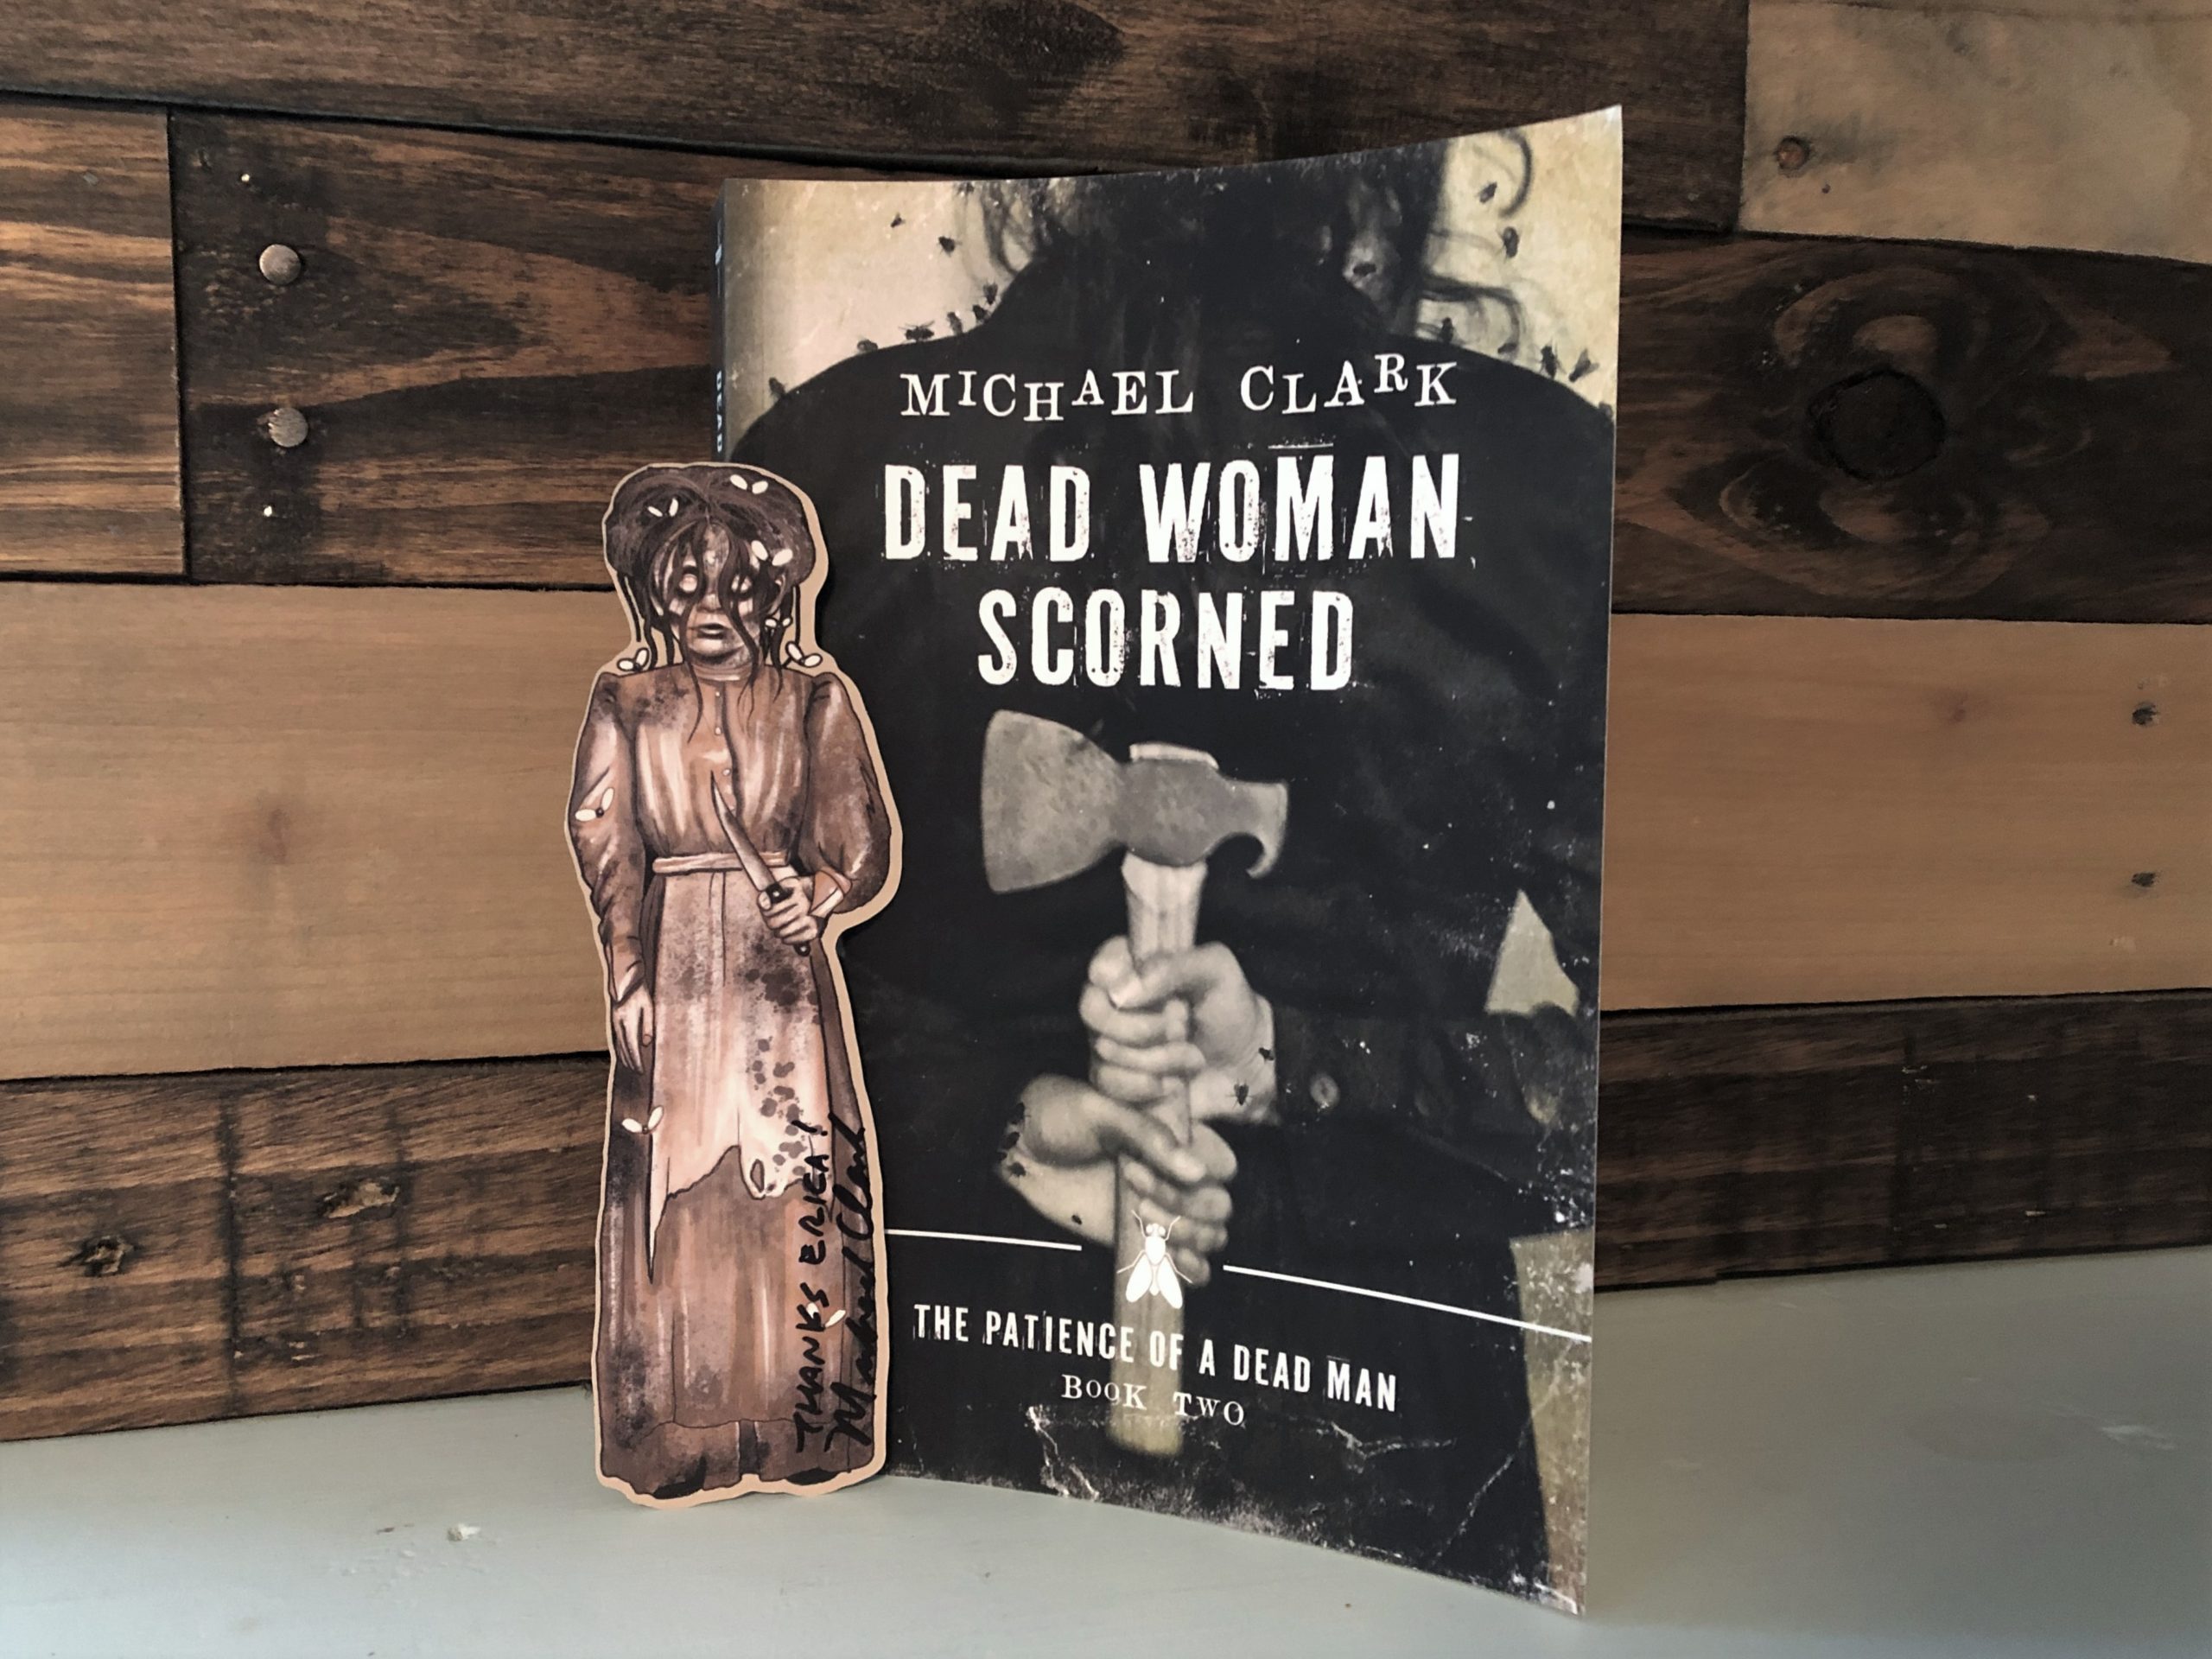 Dead Woman Scorned by Michael Clark book photo by Erica Robyn Reads